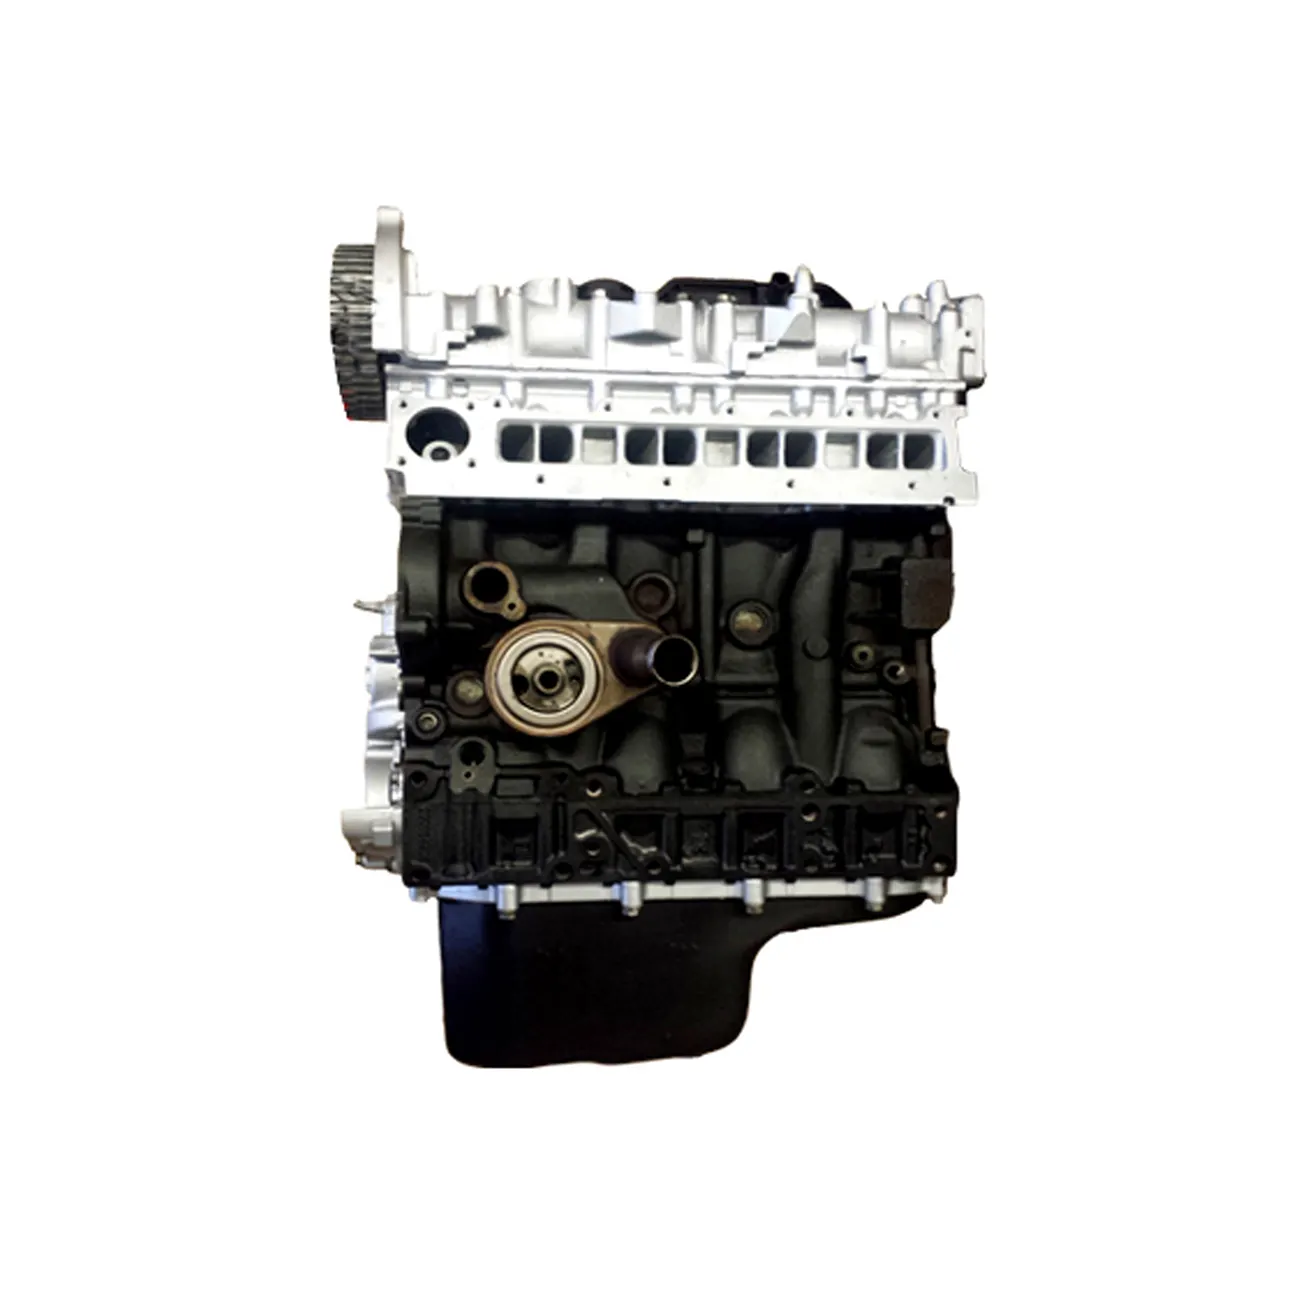 For Iveco Daily Excavator Machinery Motor F1AE0481 F1CE0481 Diesel Engine for IVECO ENGINE